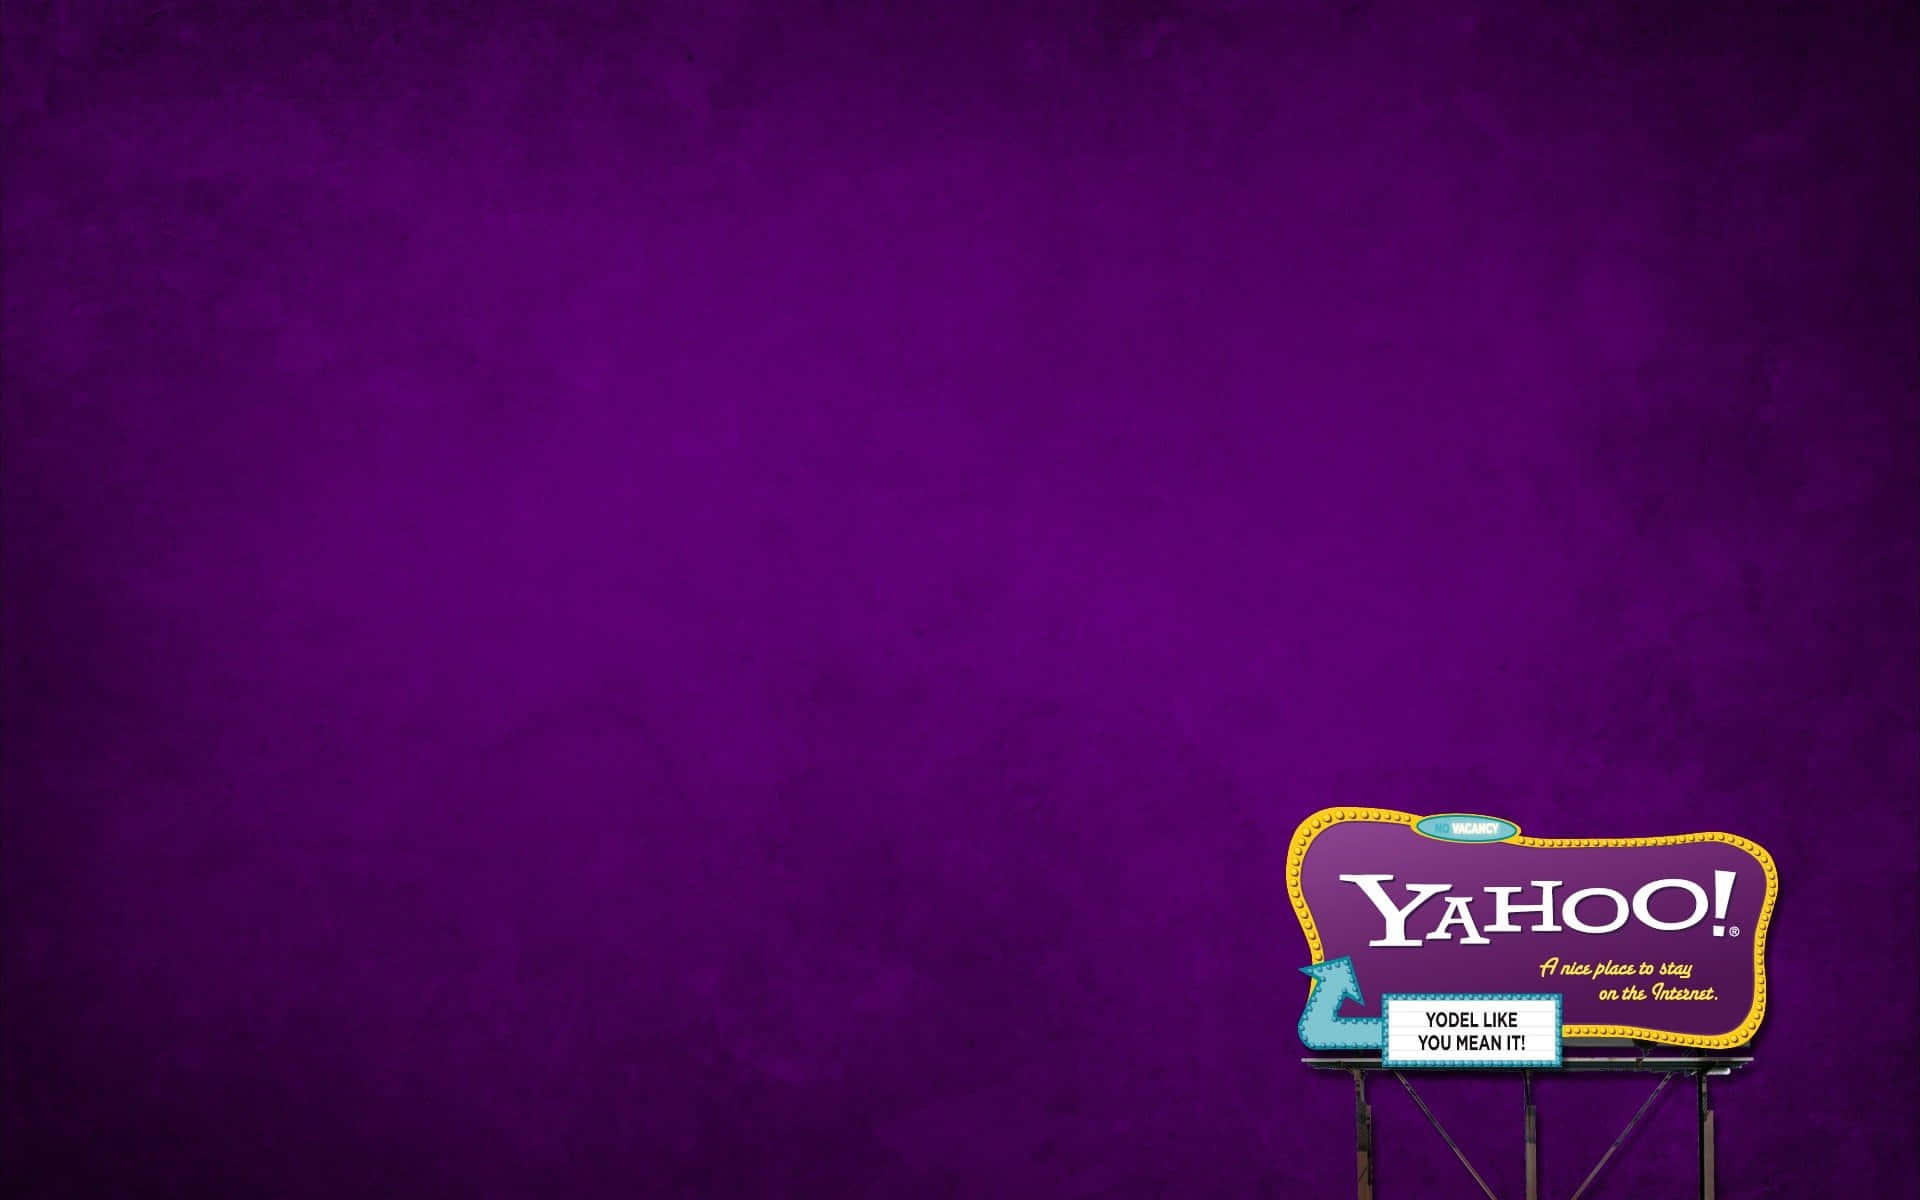 Take Your Web Searches to the Next Level with Yahoo!